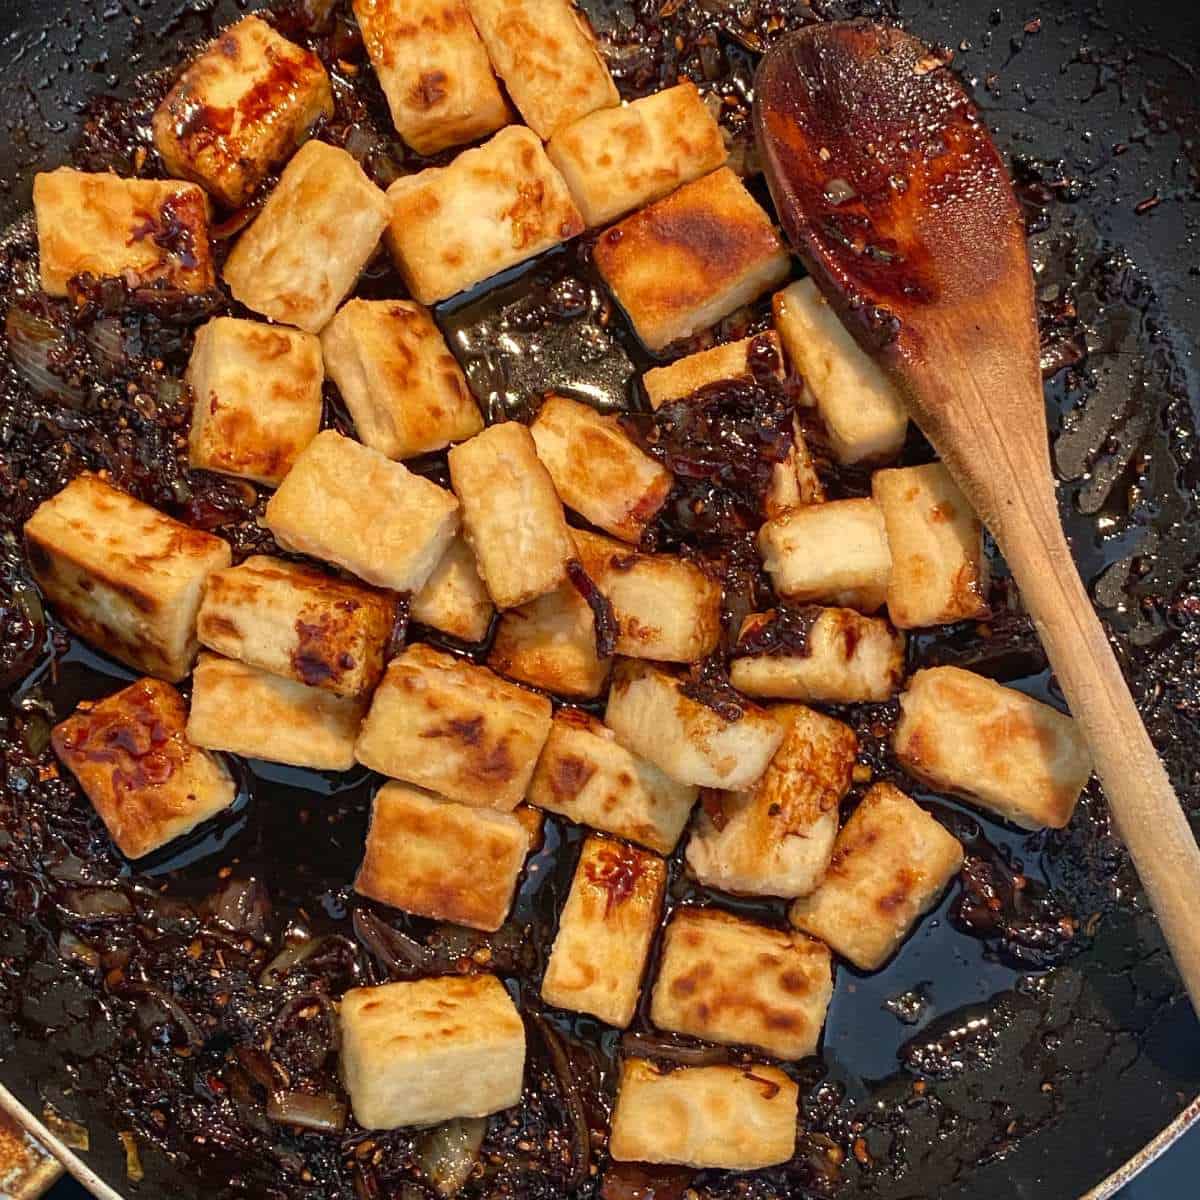 Cooked cubed of tofu being added to the black pepper marinade for Black Pepper Tofu